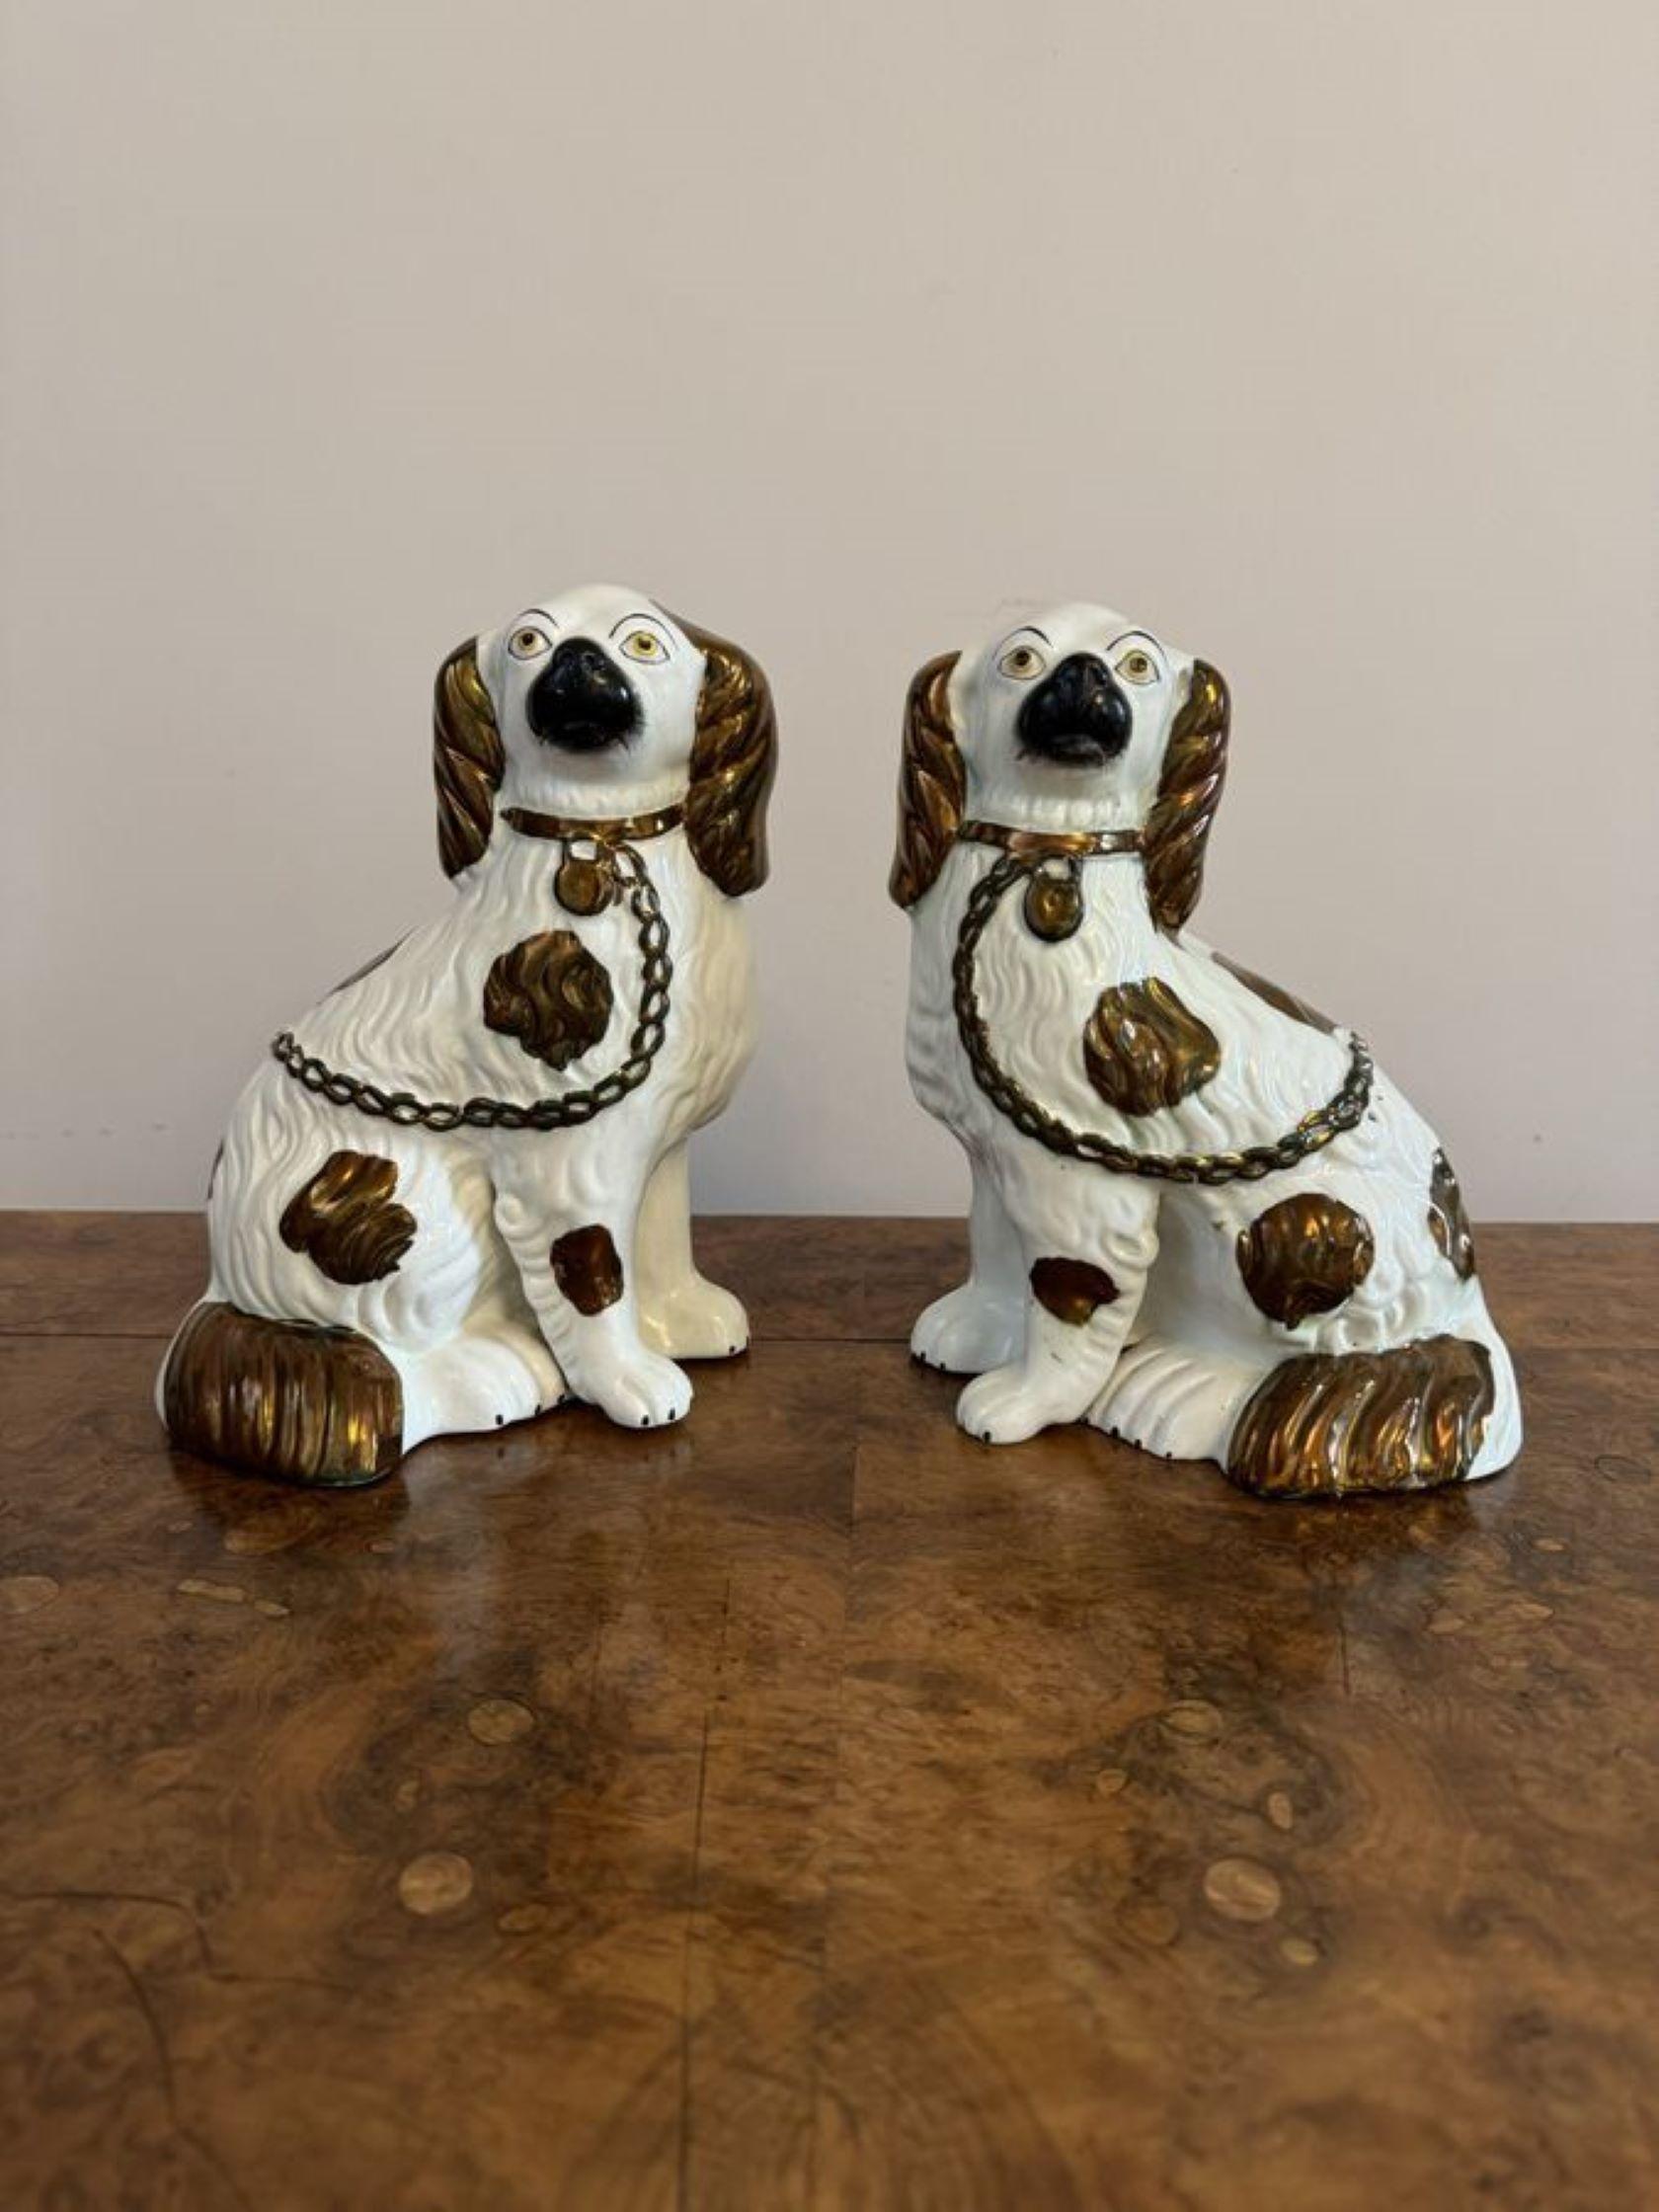 Charming pair of antique Victorian Staffordshire dogs, both seated spaniels with their front legs out, in matching copper brown & white coats, with collars, padlocks and chains.

D. 1880
